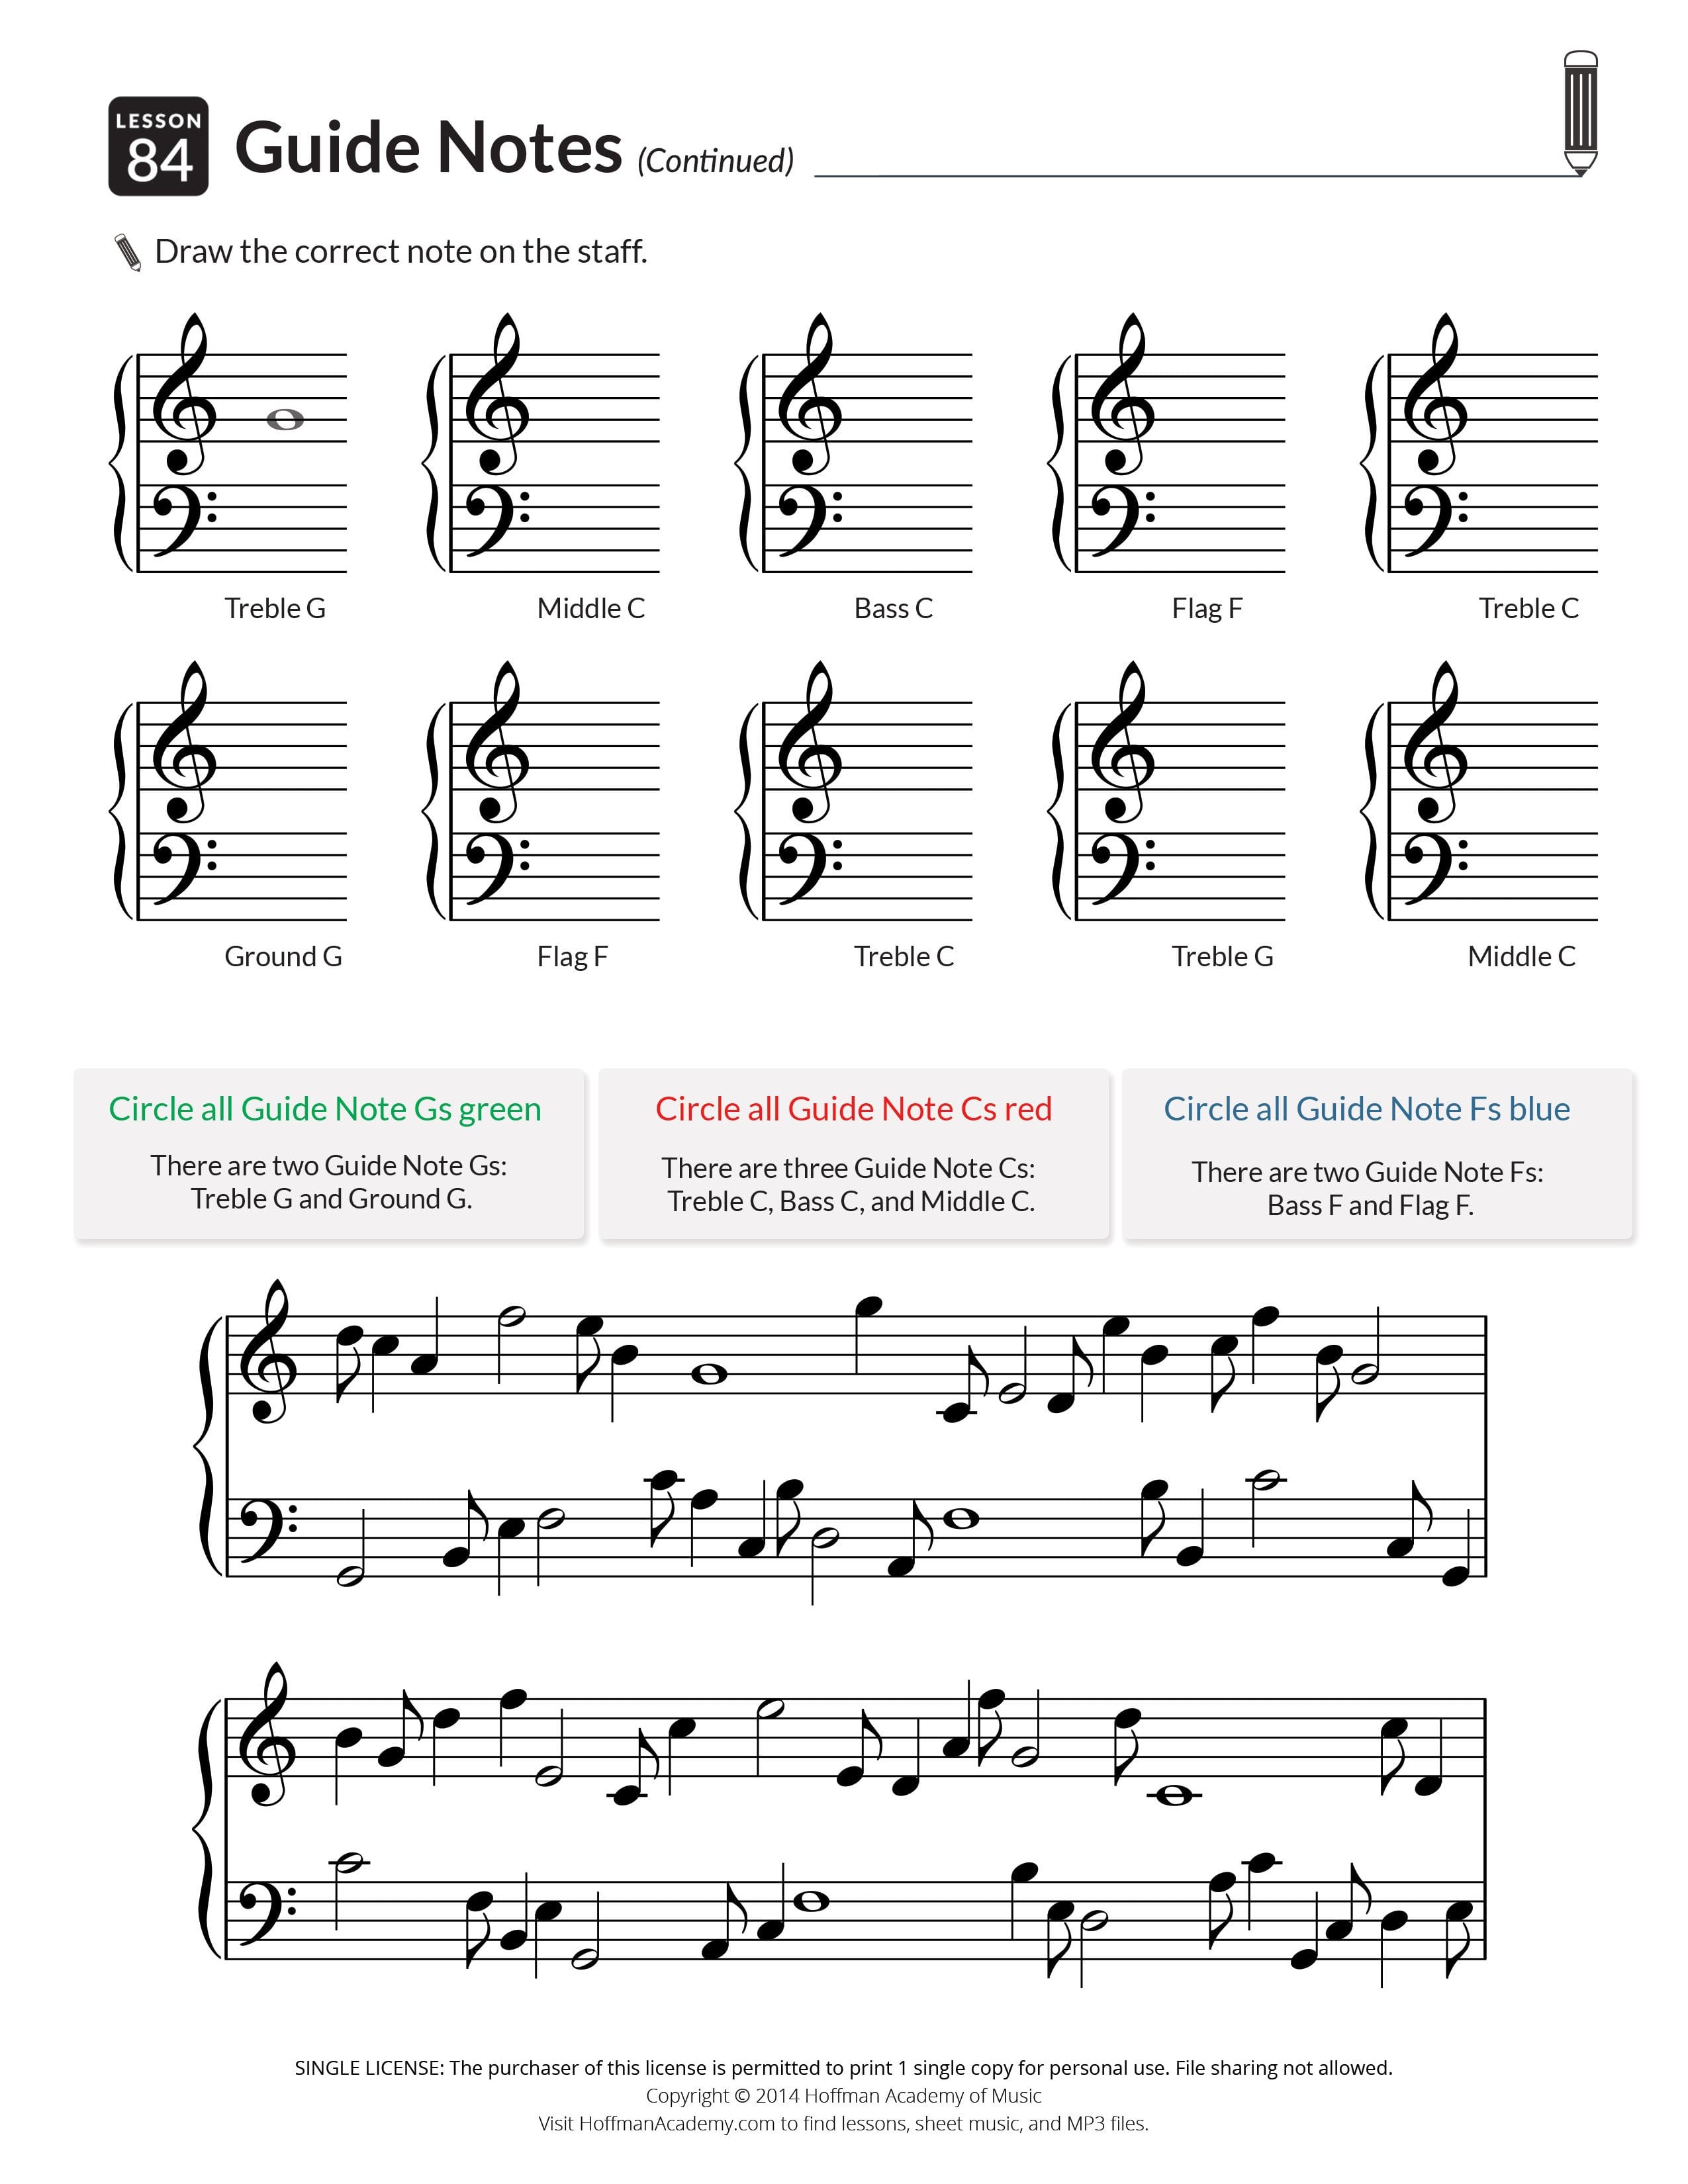 Printables  Audio For Piano Units 15 Lessons 1100  Hoffman Academy Inside Beginner Piano Worksheets